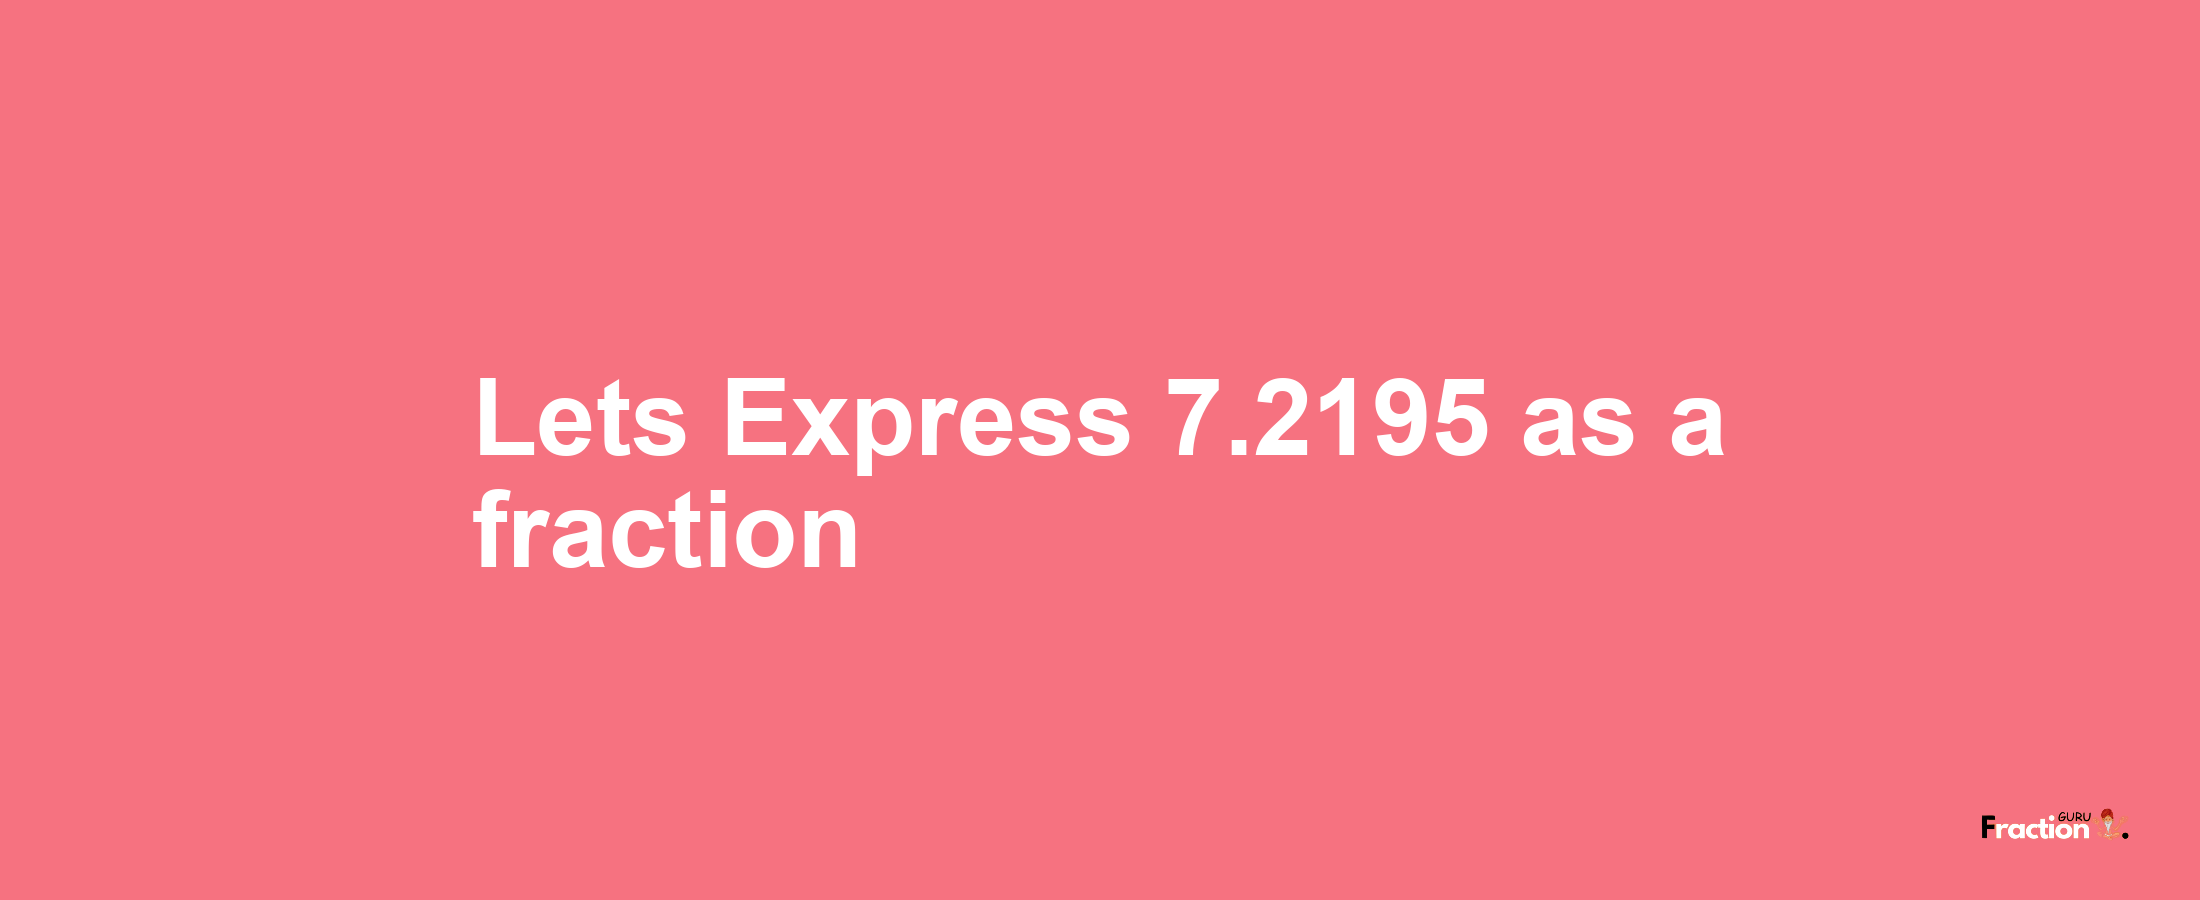 Lets Express 7.2195 as afraction